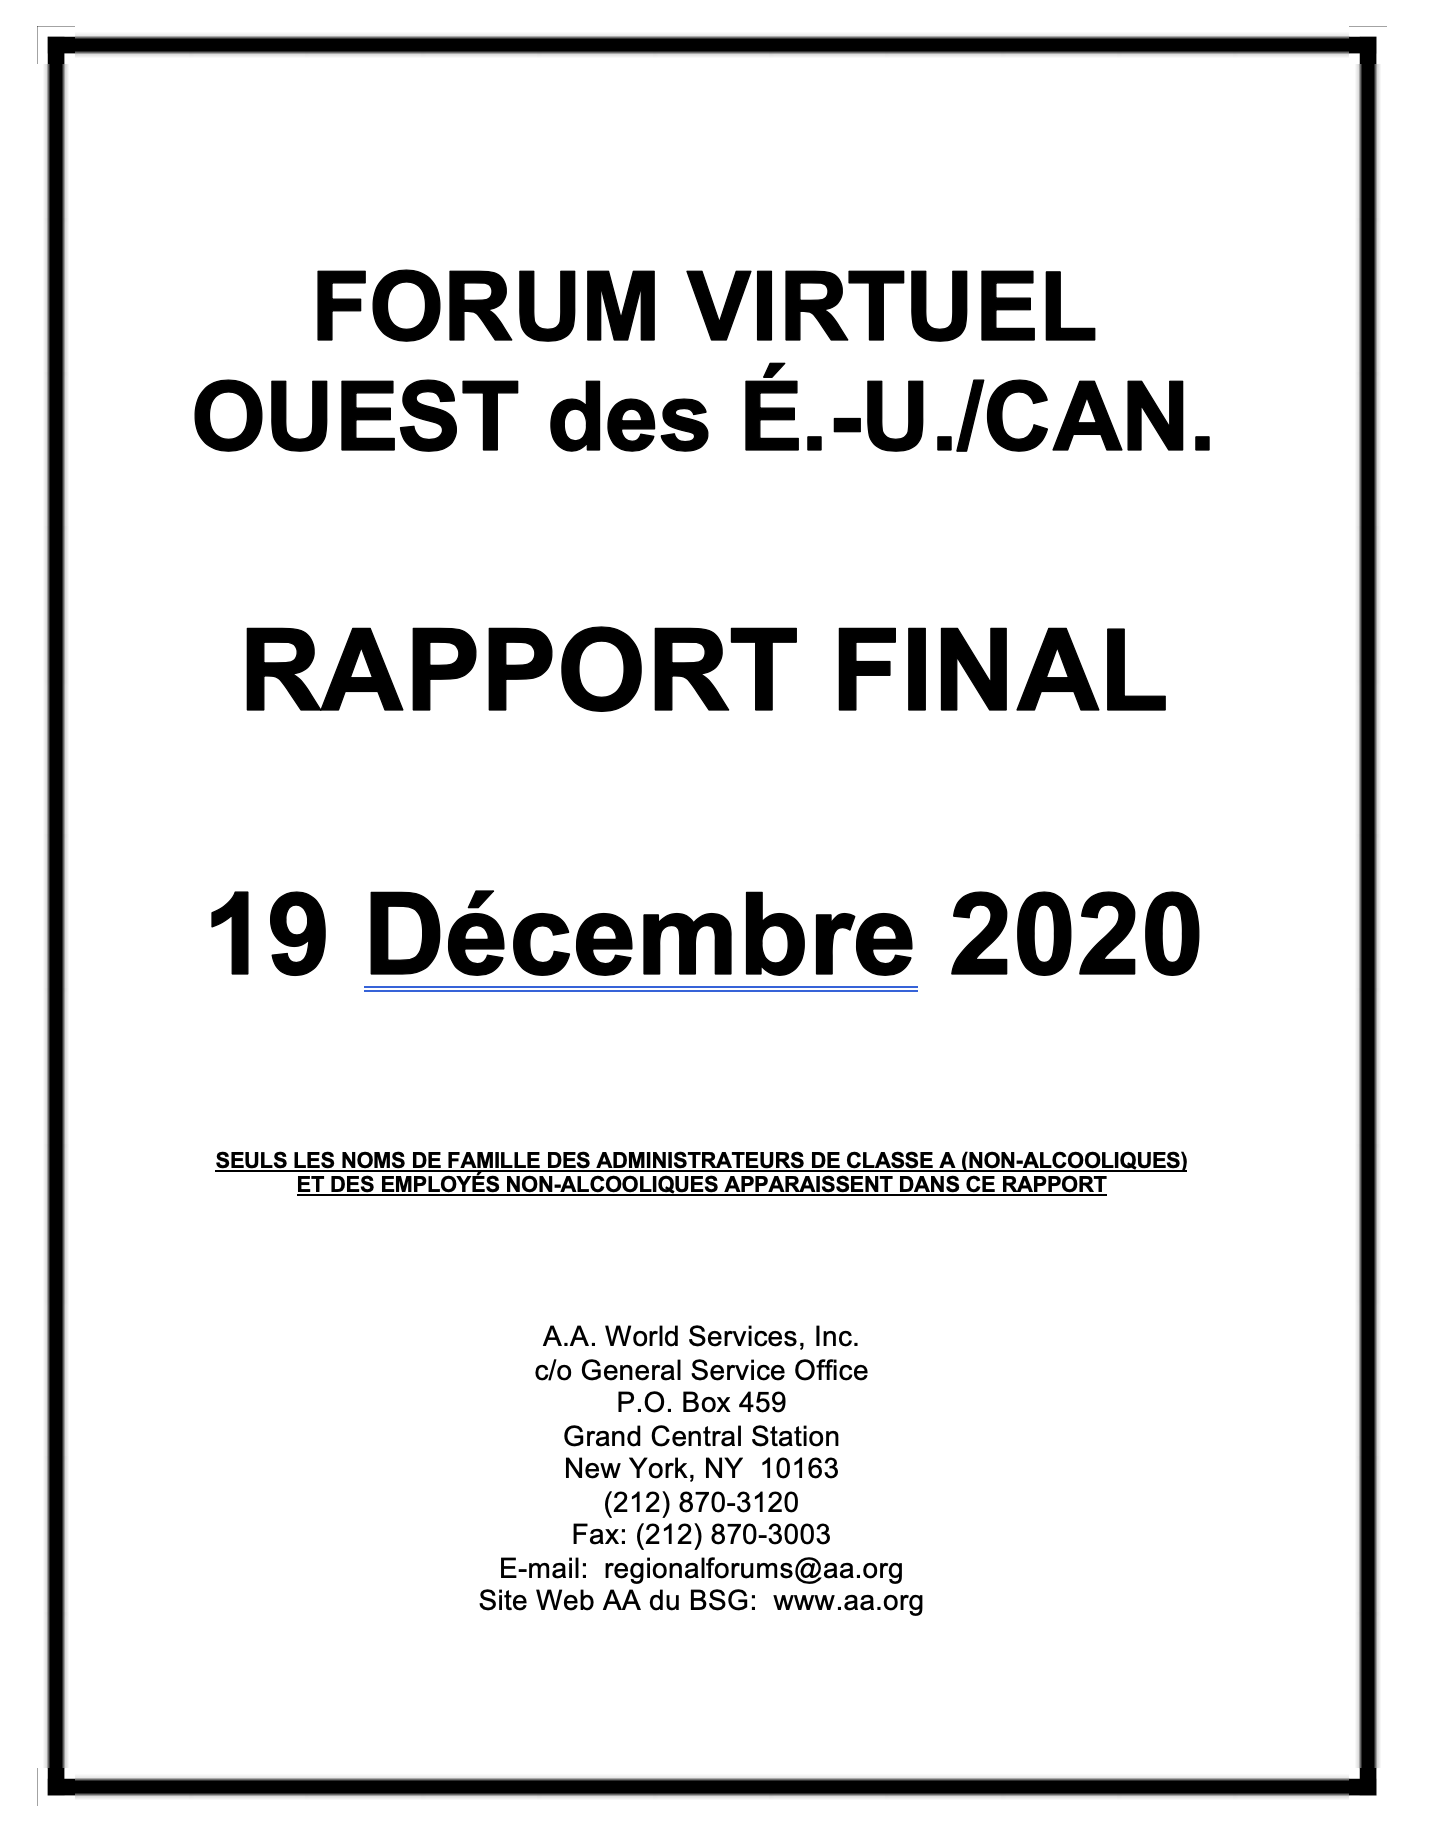 FR-2020 US-CAN West Final Report_0.png